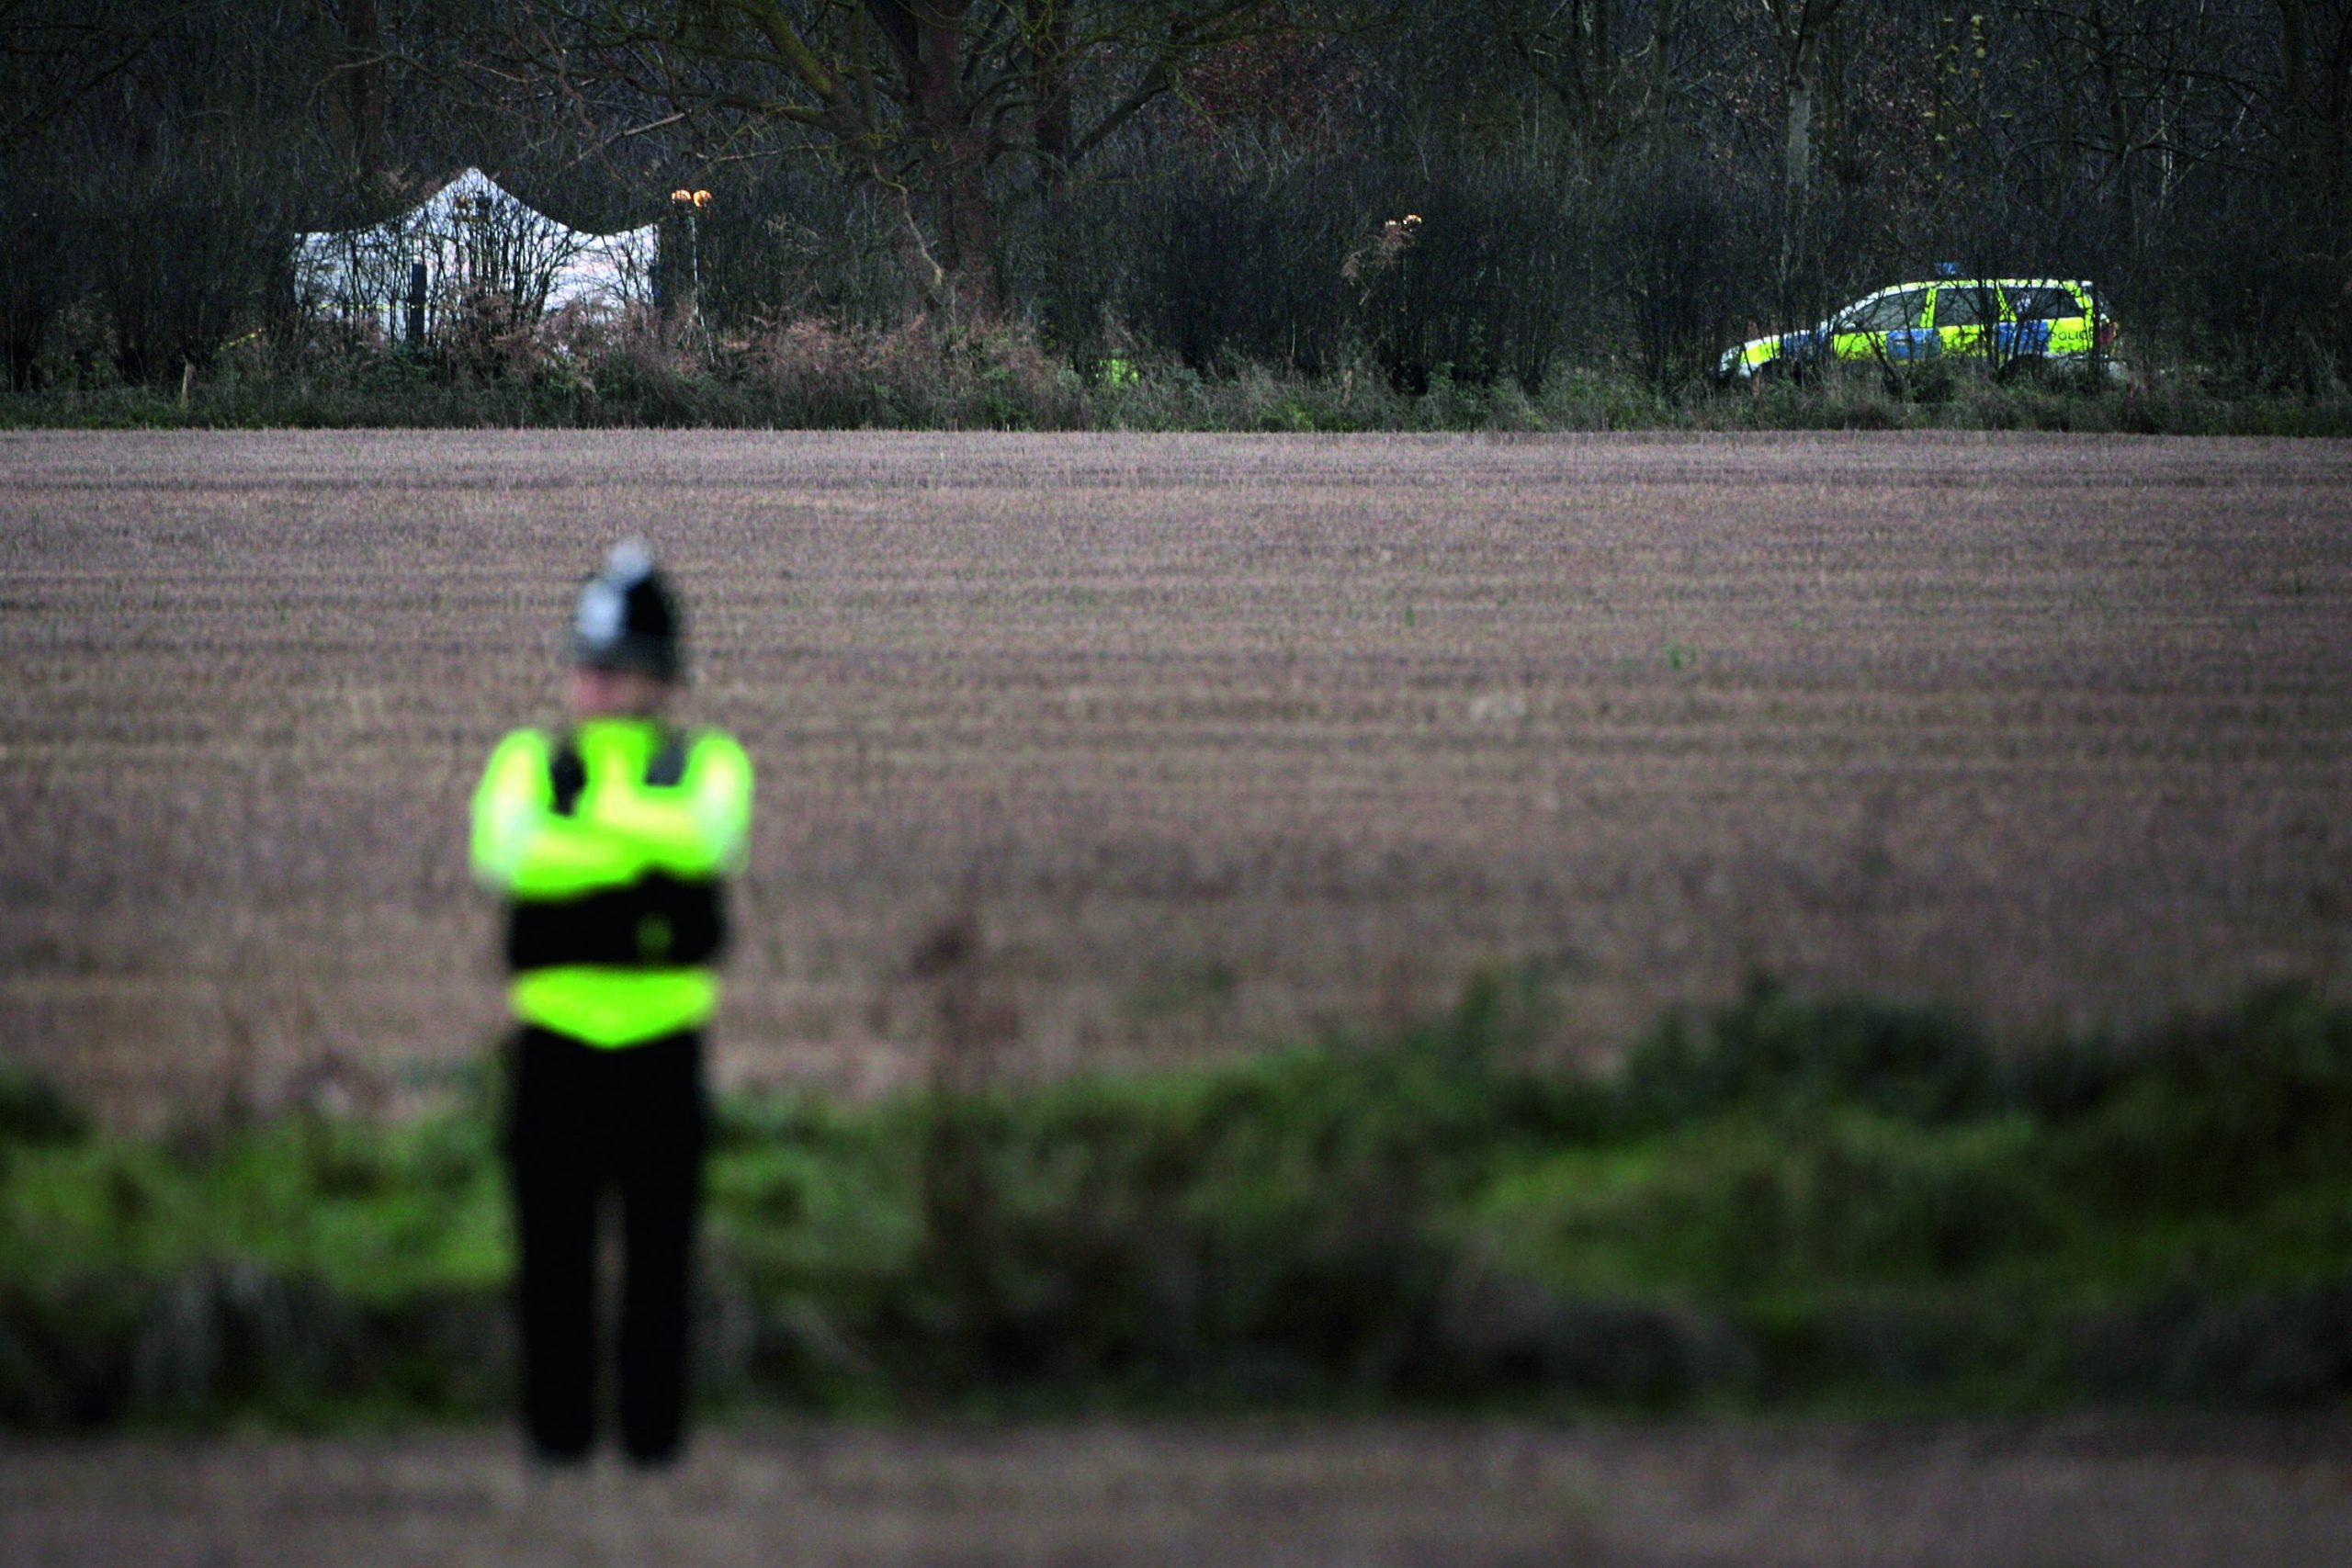 IPSWICH, UNITED KINGDOM - DECEMBER 13: Police guard the perimeter of a crime scene near Levington village where two female bodies were found on December 13, 2006 in Ipswich, England. Forensic teams are searching an area of woodland where the bodies of two women were found yesterday which are believed to be that of missing prostitutes Paula Clennell and Annette Nicholls. (Photo by Bruno Vincent/Getty Images)